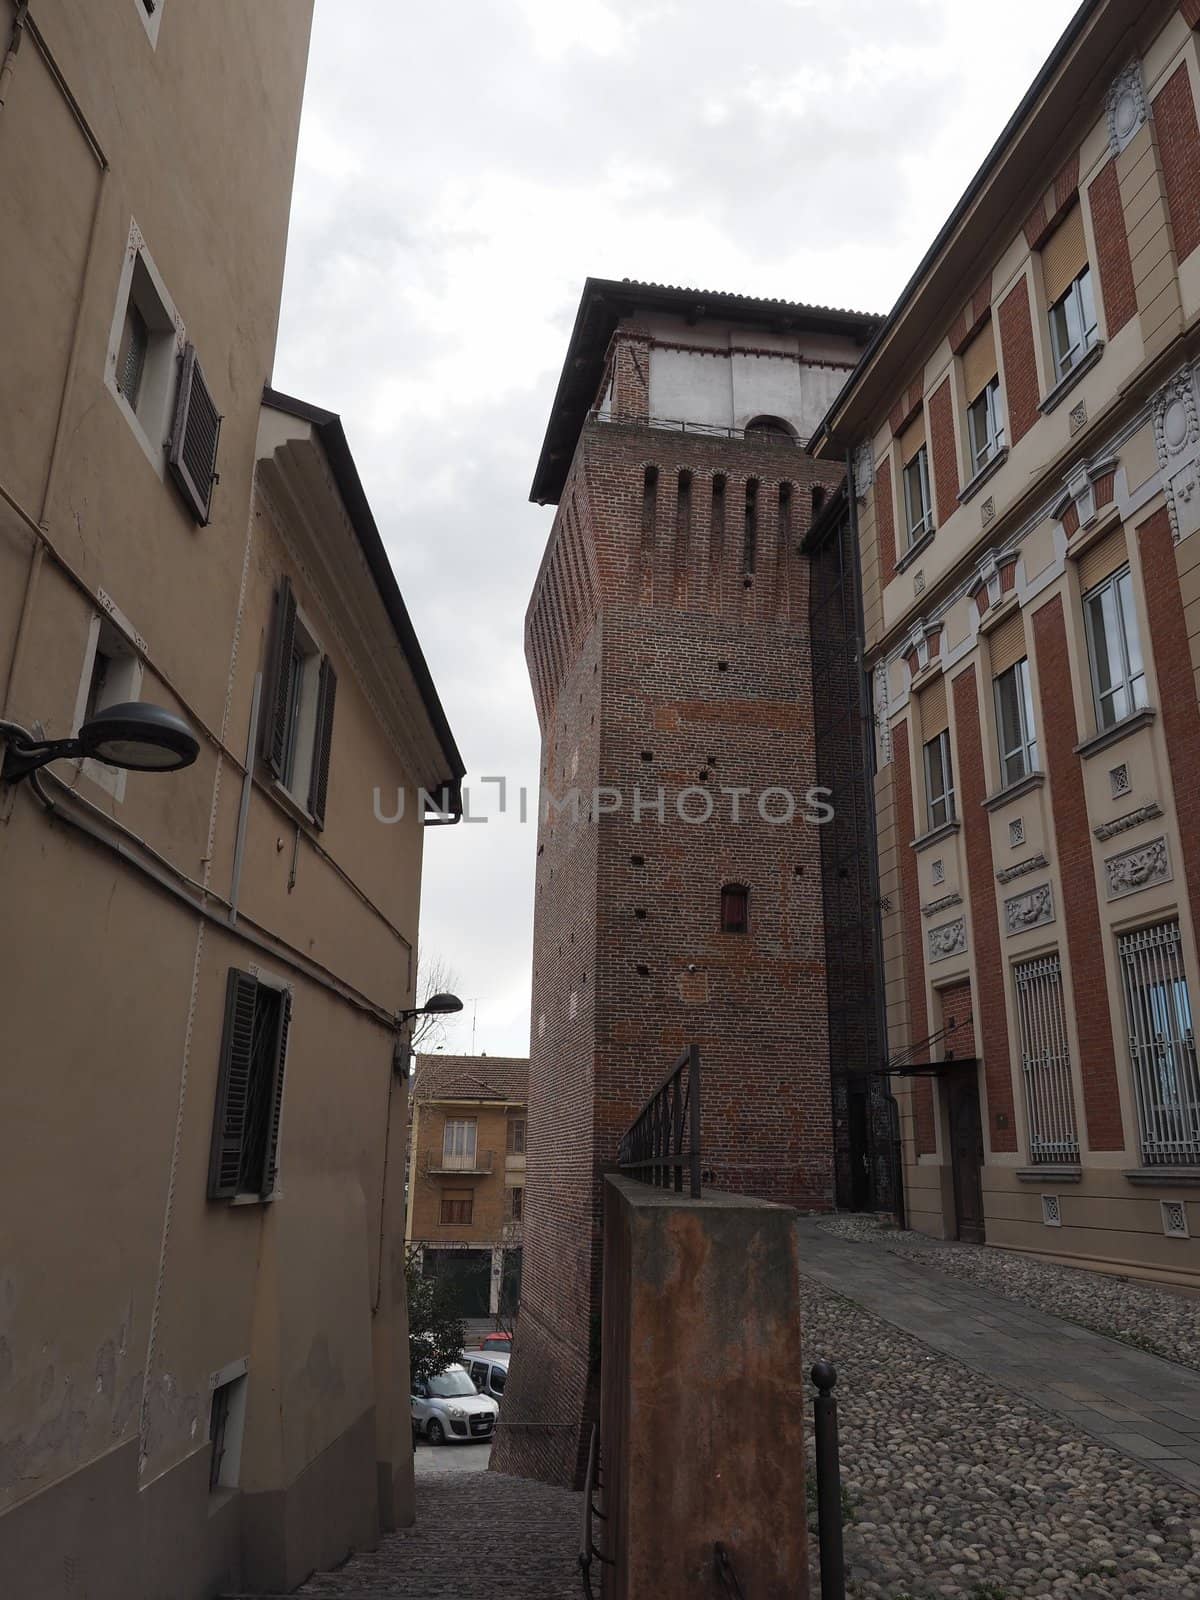 SETTIMO TORINESE, ITALY - CIRCA FEBRUARY 2020: Torre Medievale medieval tower and castle